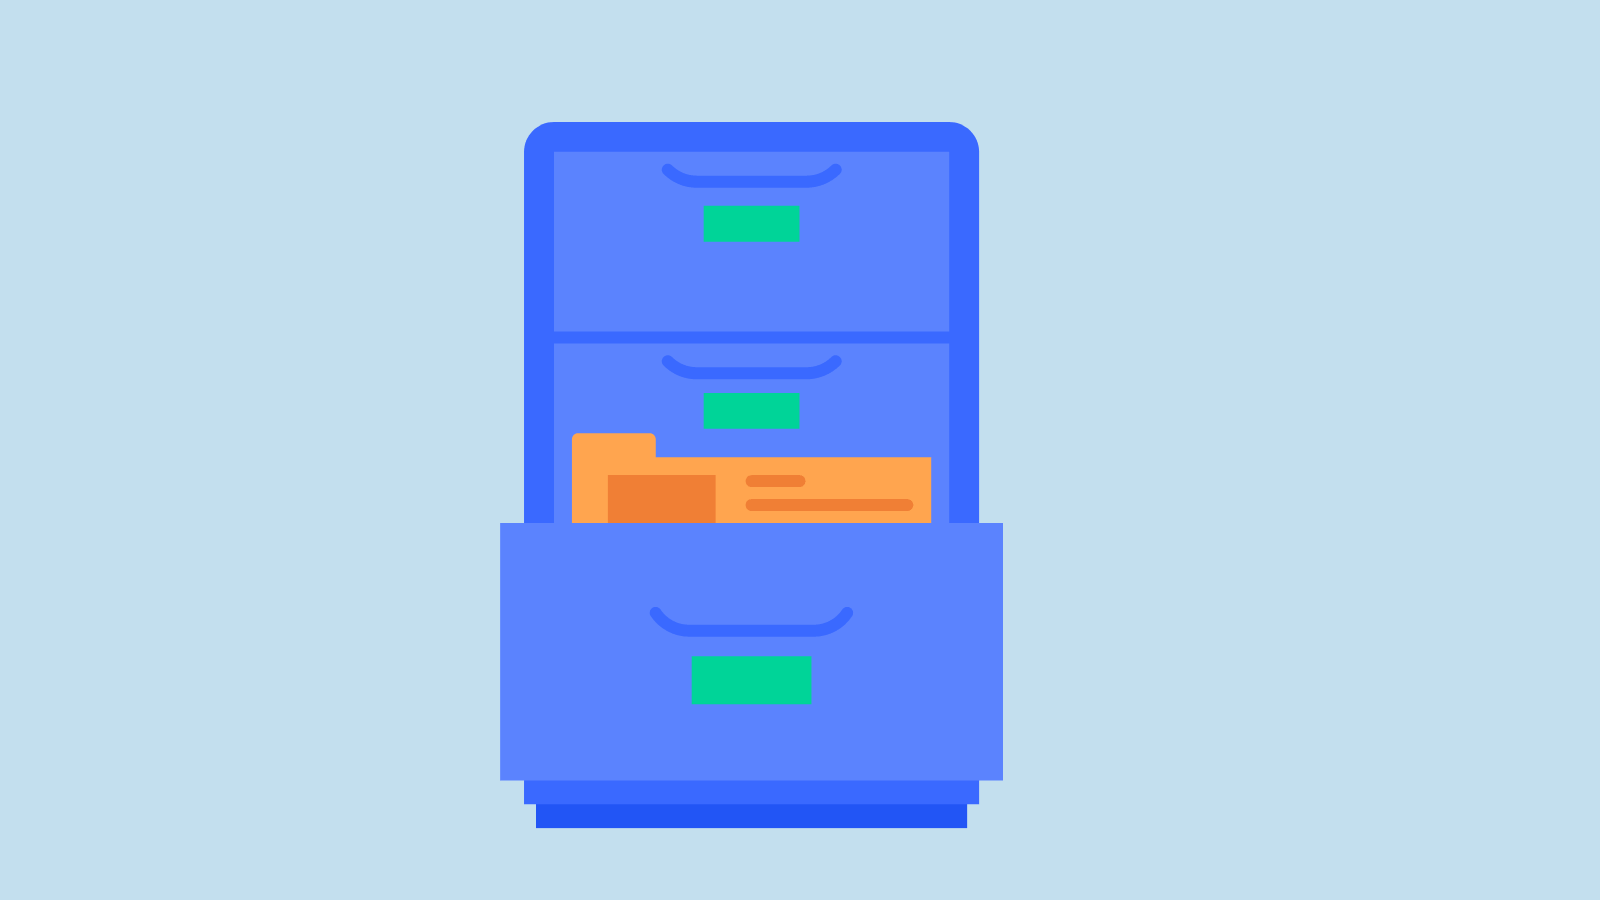 An illustration of a filing cabinet